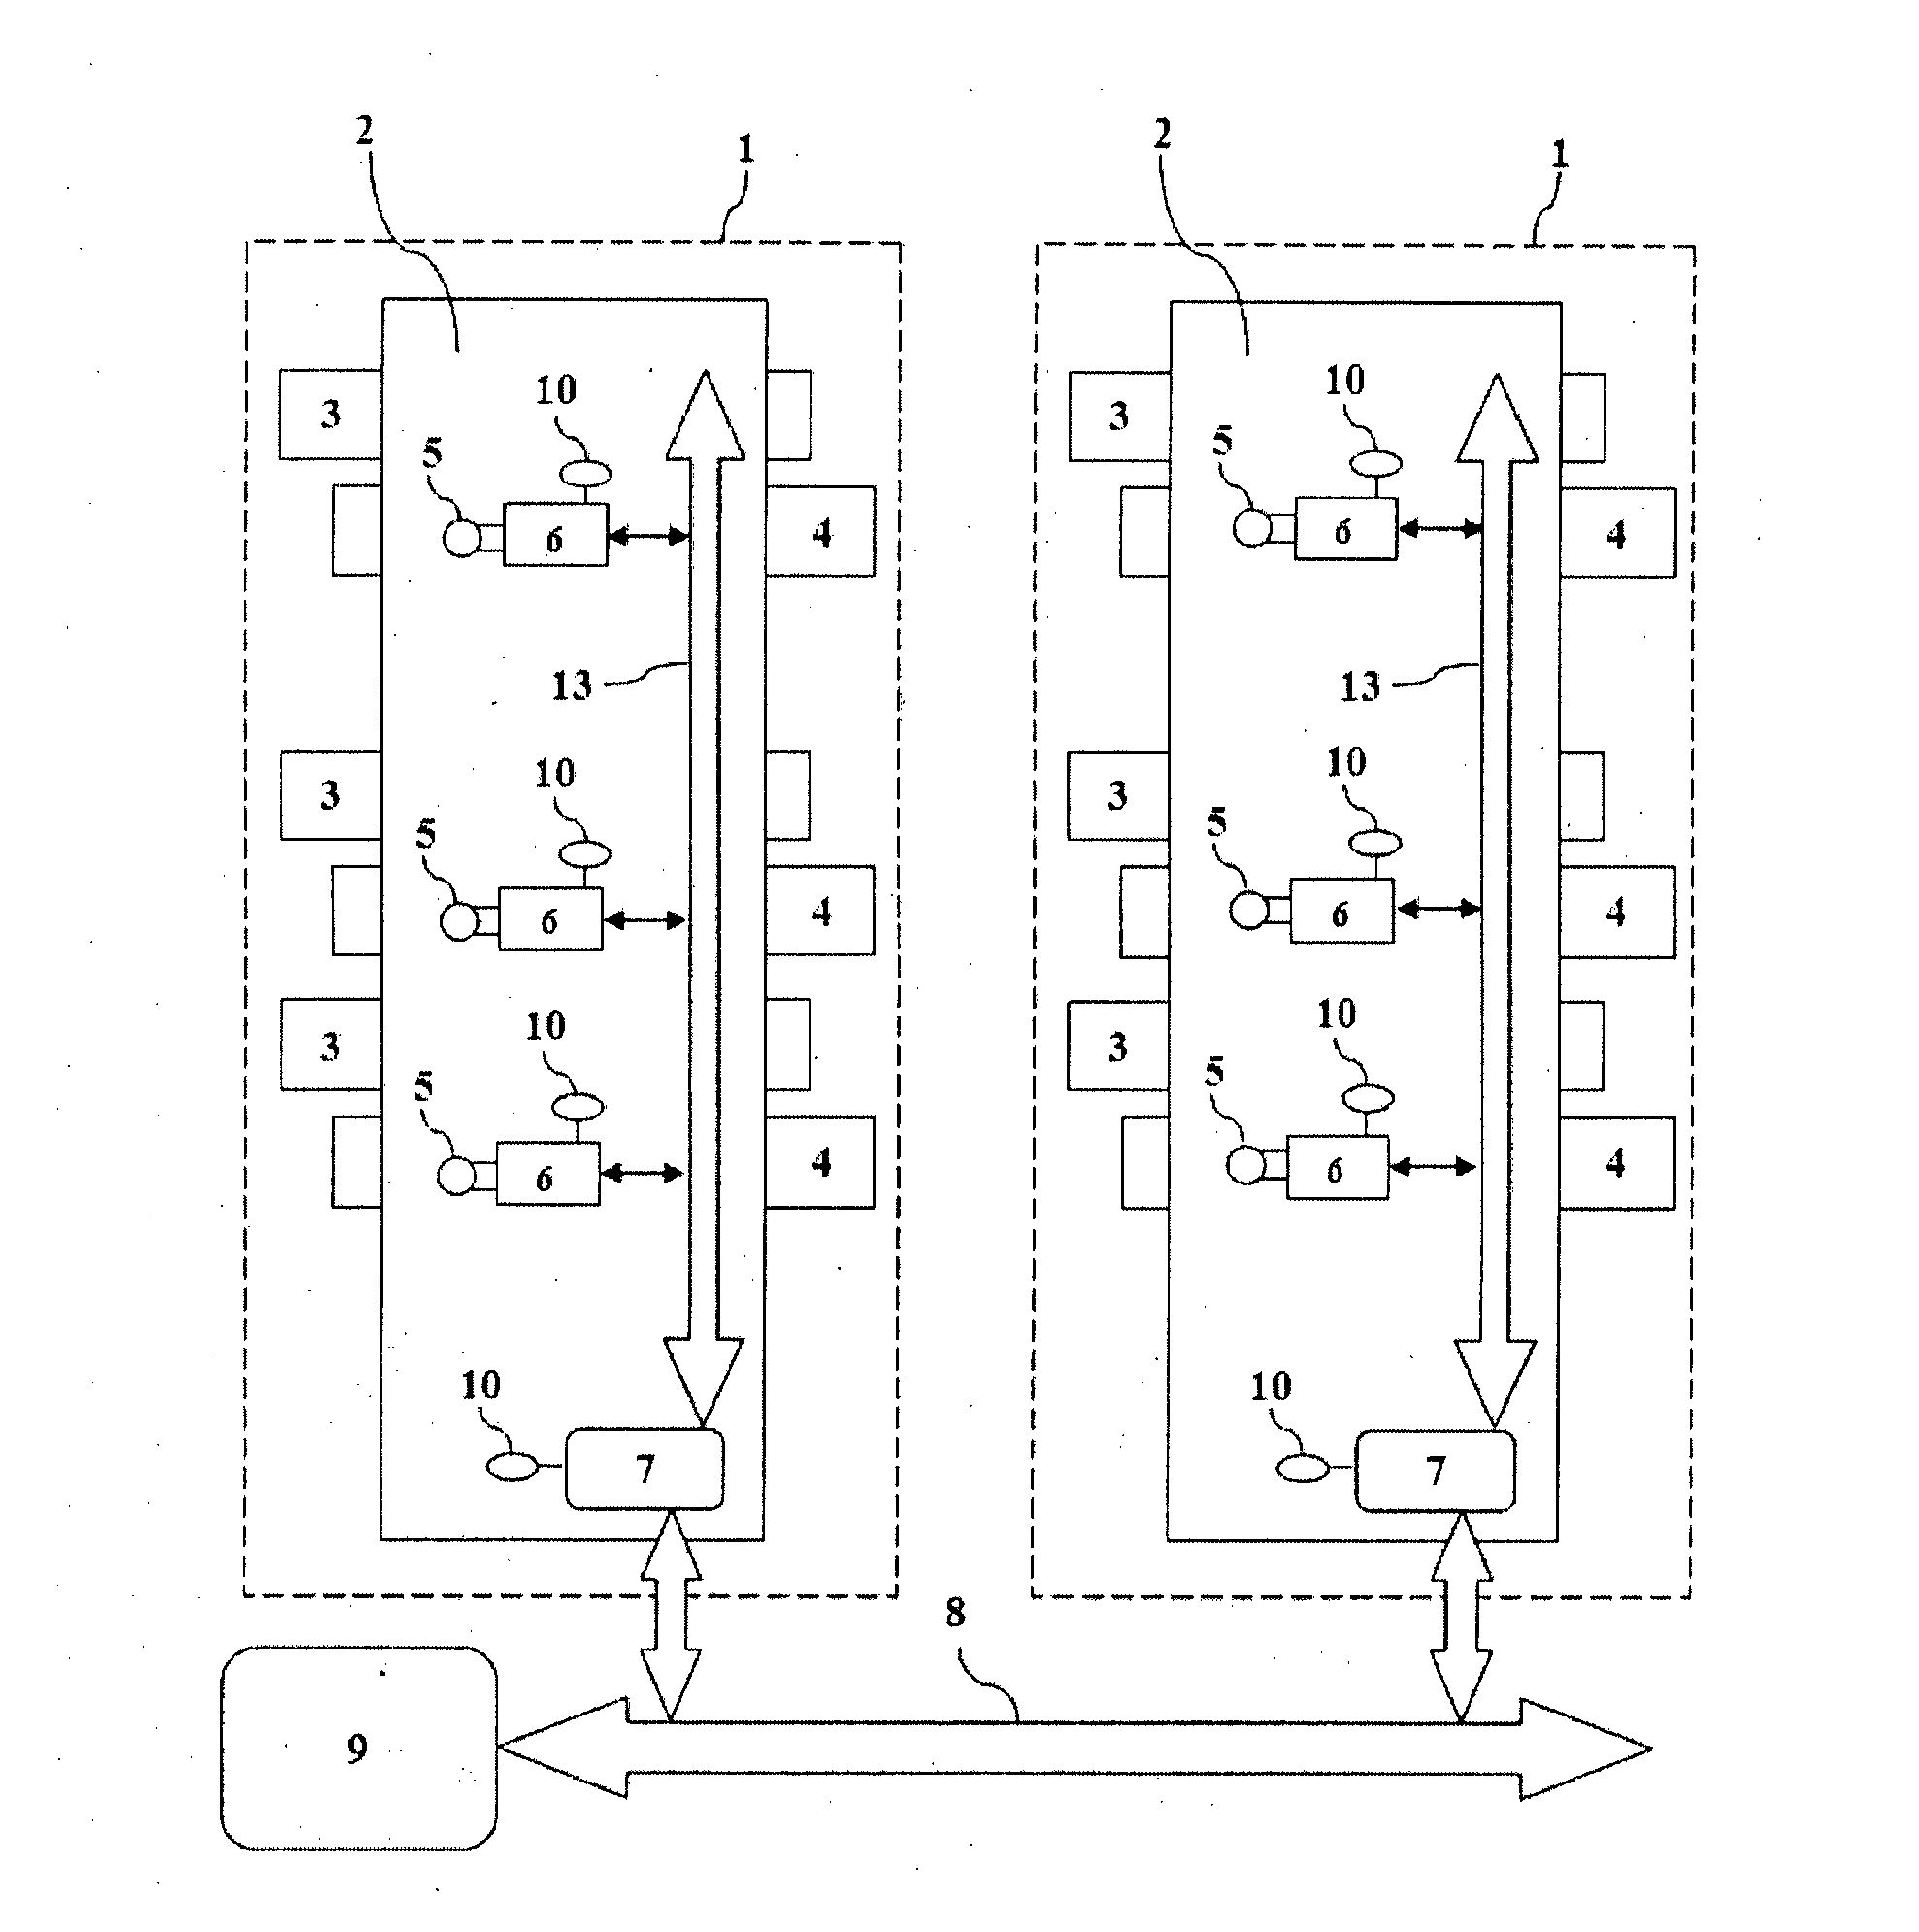 Electric current sensing and management system for electrolytic plants